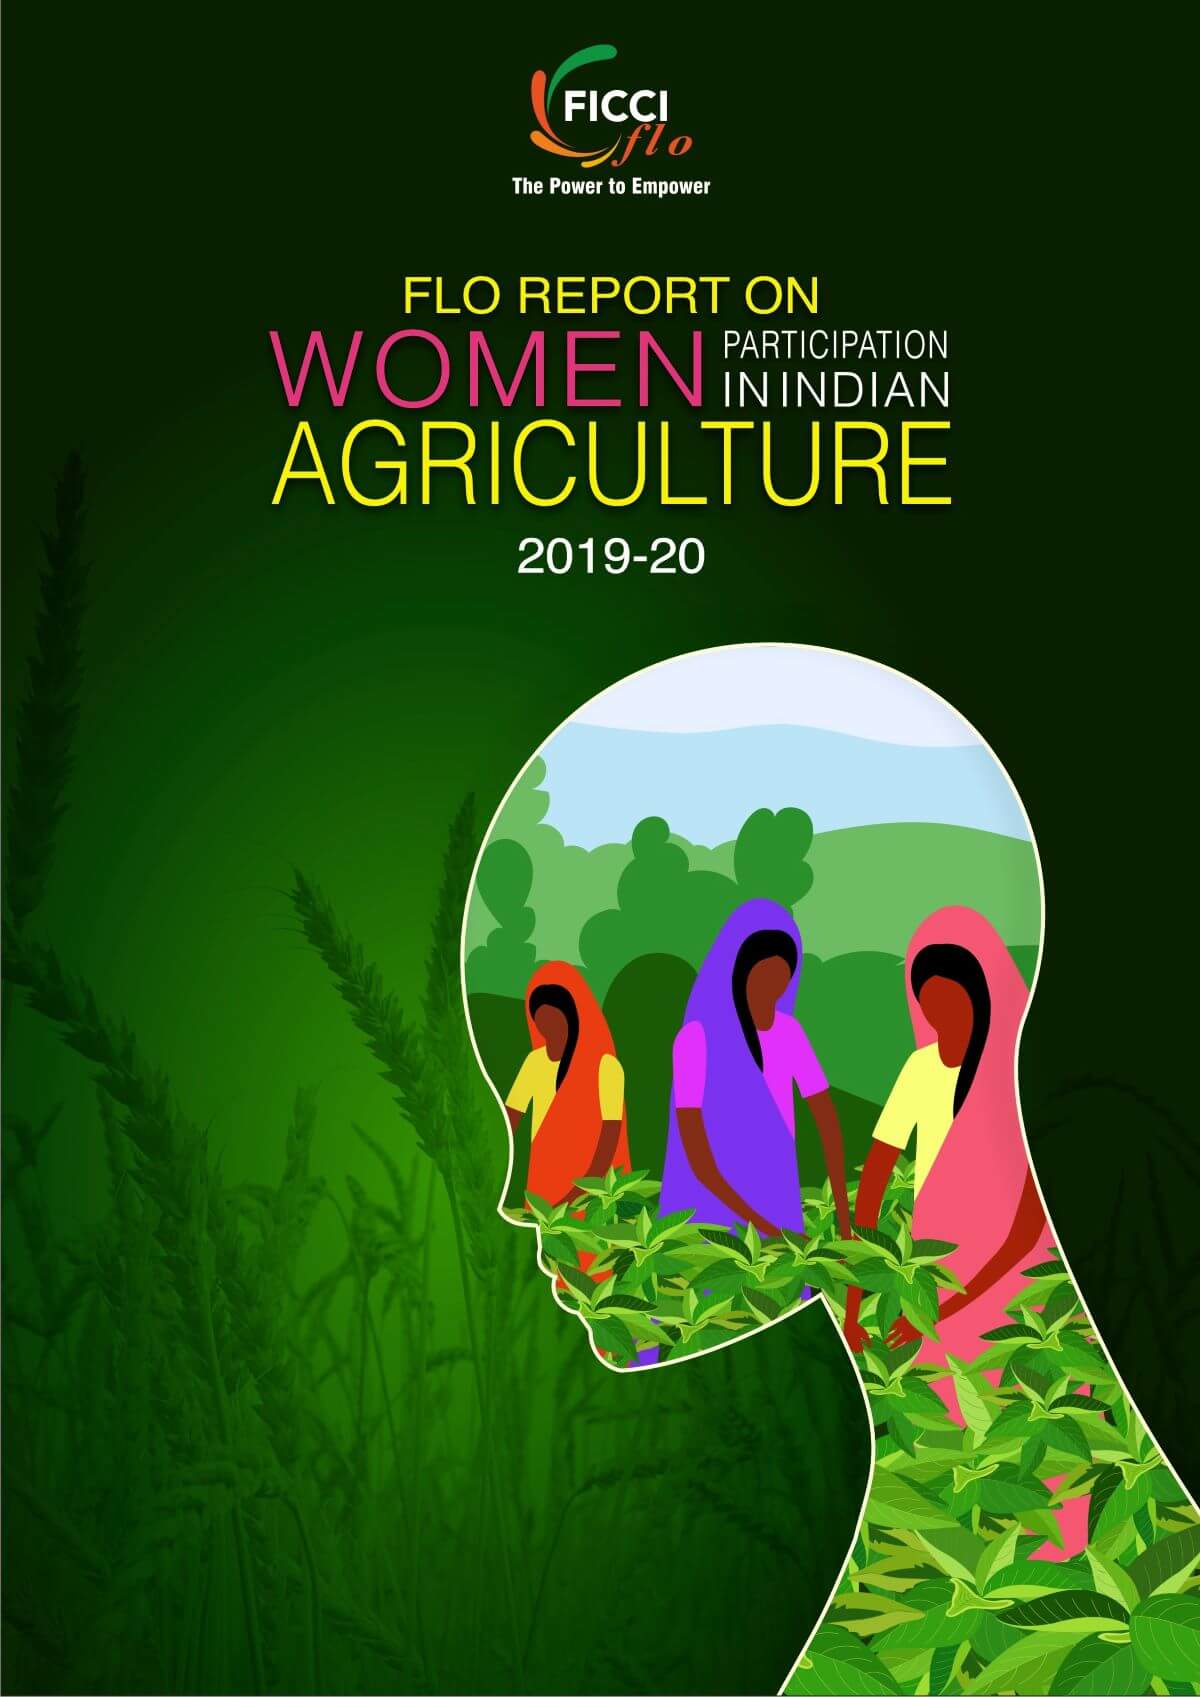 parshottam-rupala-unveils-flo-report-on-women-participation-in-indian-agriculture